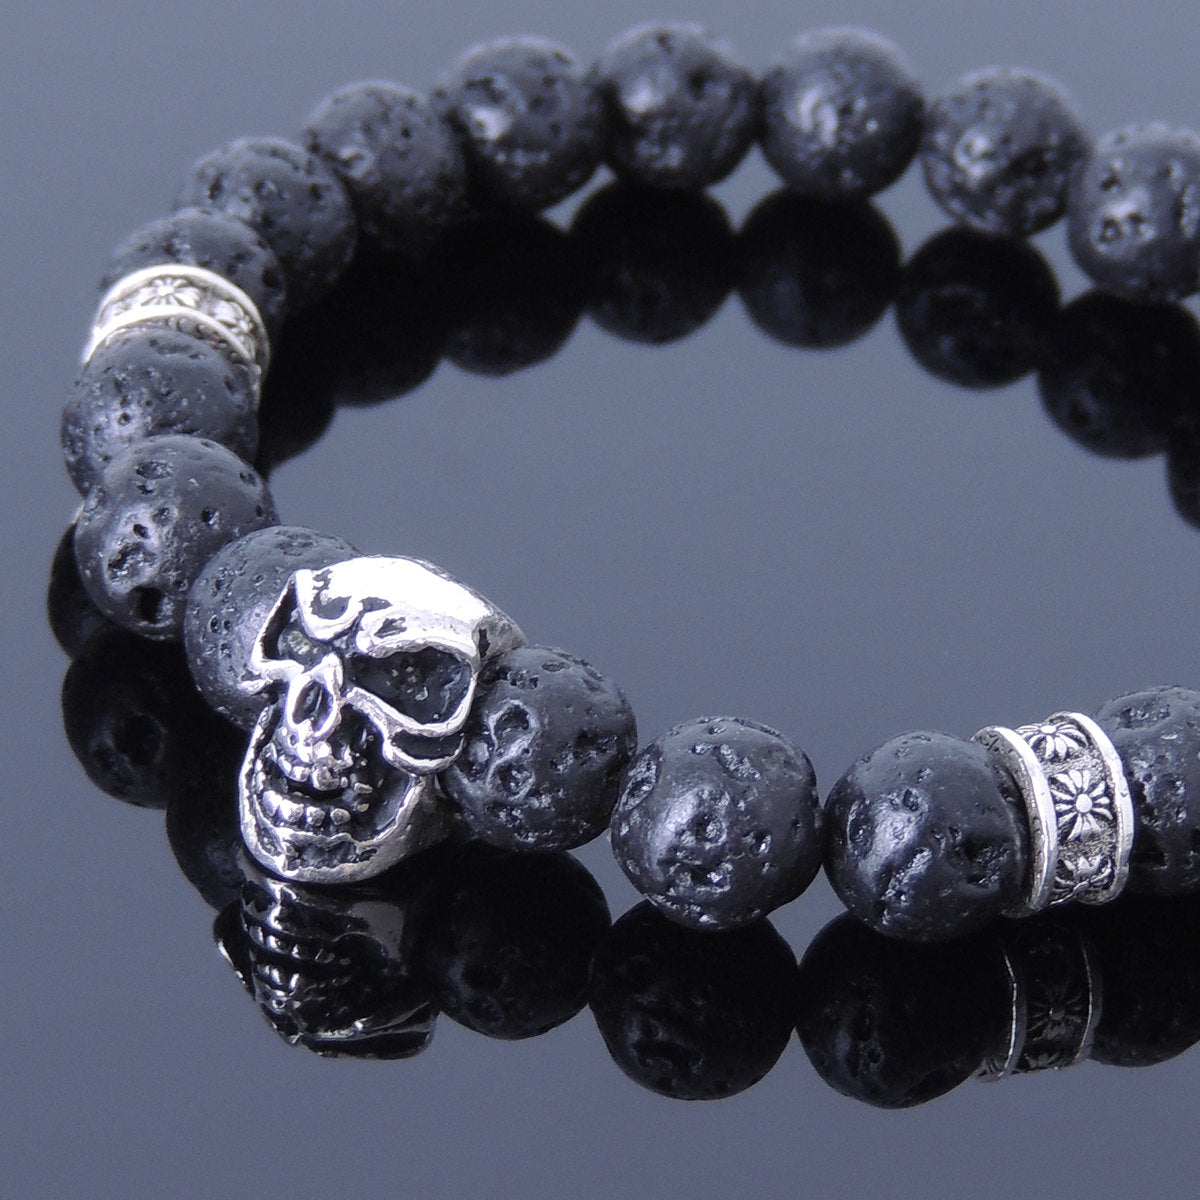 8mm Lava Rock Healing Stone Bracelet with S925 Sterling Silver Skull Charm & Celtic Cross Spacers - Handmade by Gem & Silver BR505